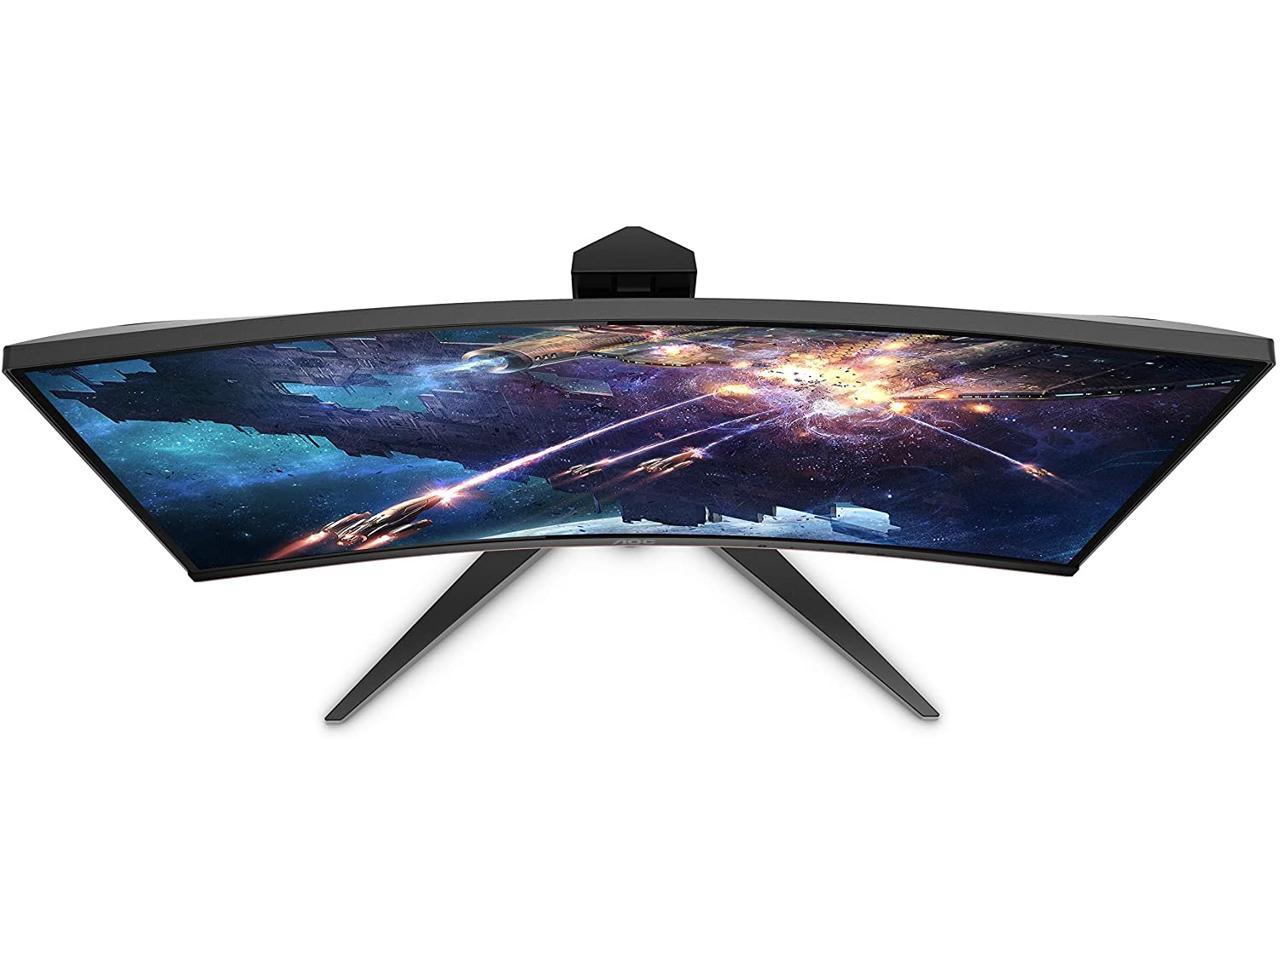 Aoc C24g1a 24 Curved Frameless Gaming Monitor Fhd 19x1080 1500r Va 1ms Mprt 165hz 144hz Supported Freesync Premium Height Adjustable Newegg Com